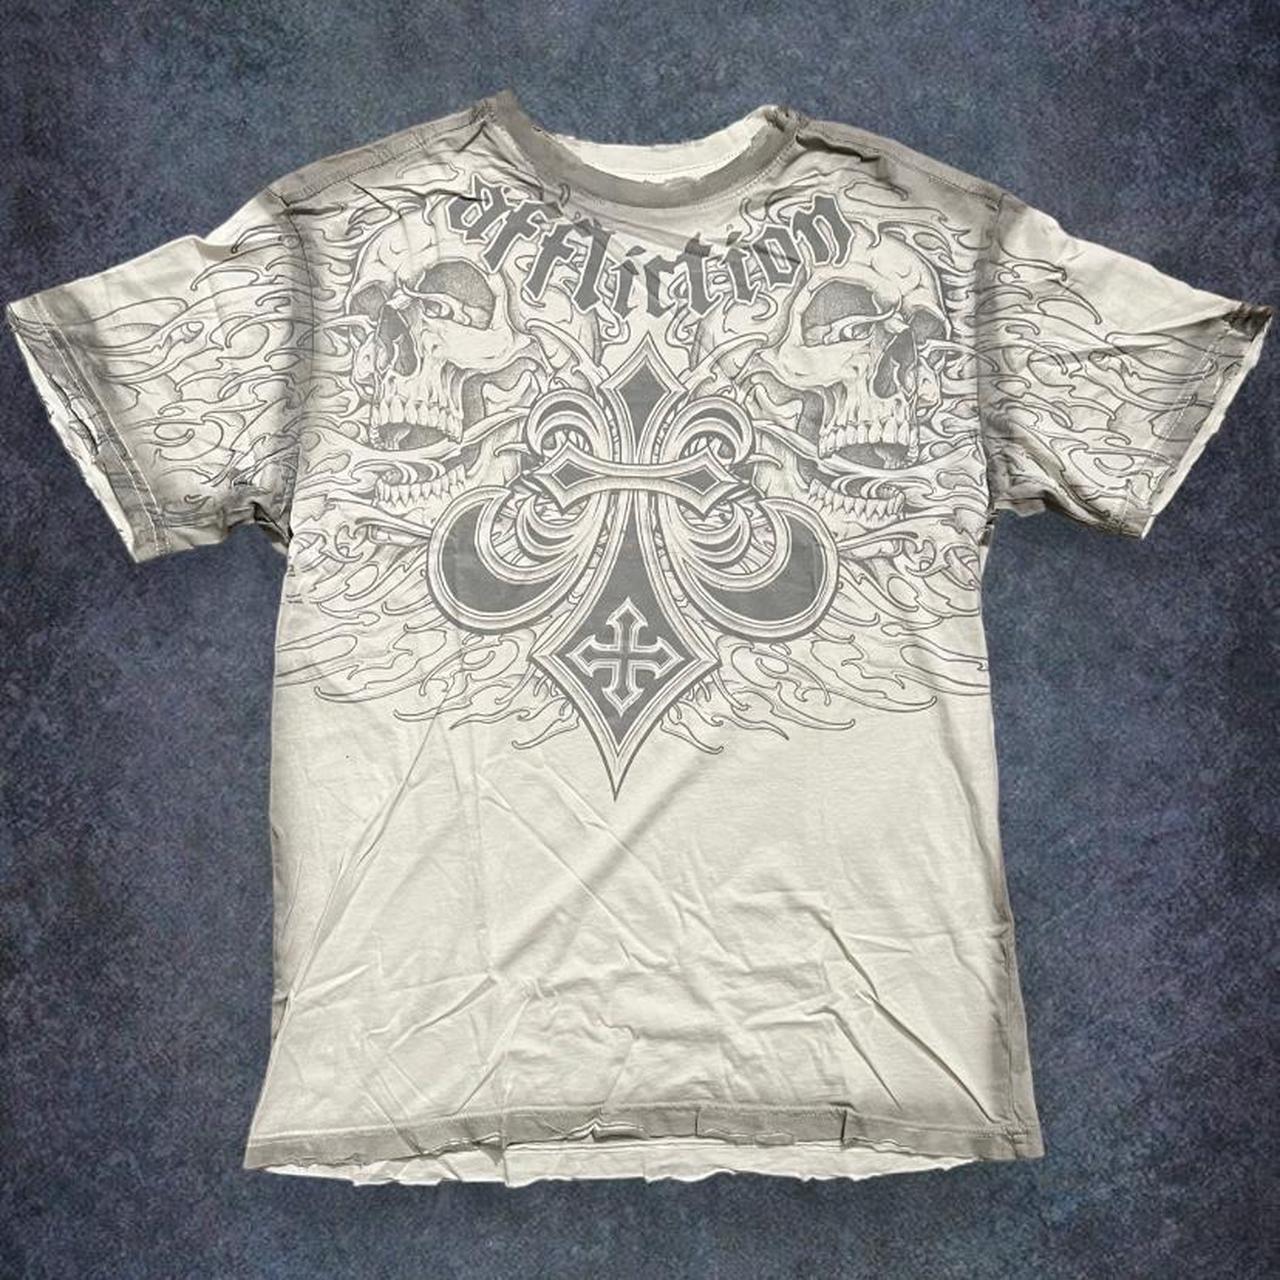 Affliction Men's Grey and White T-shirt